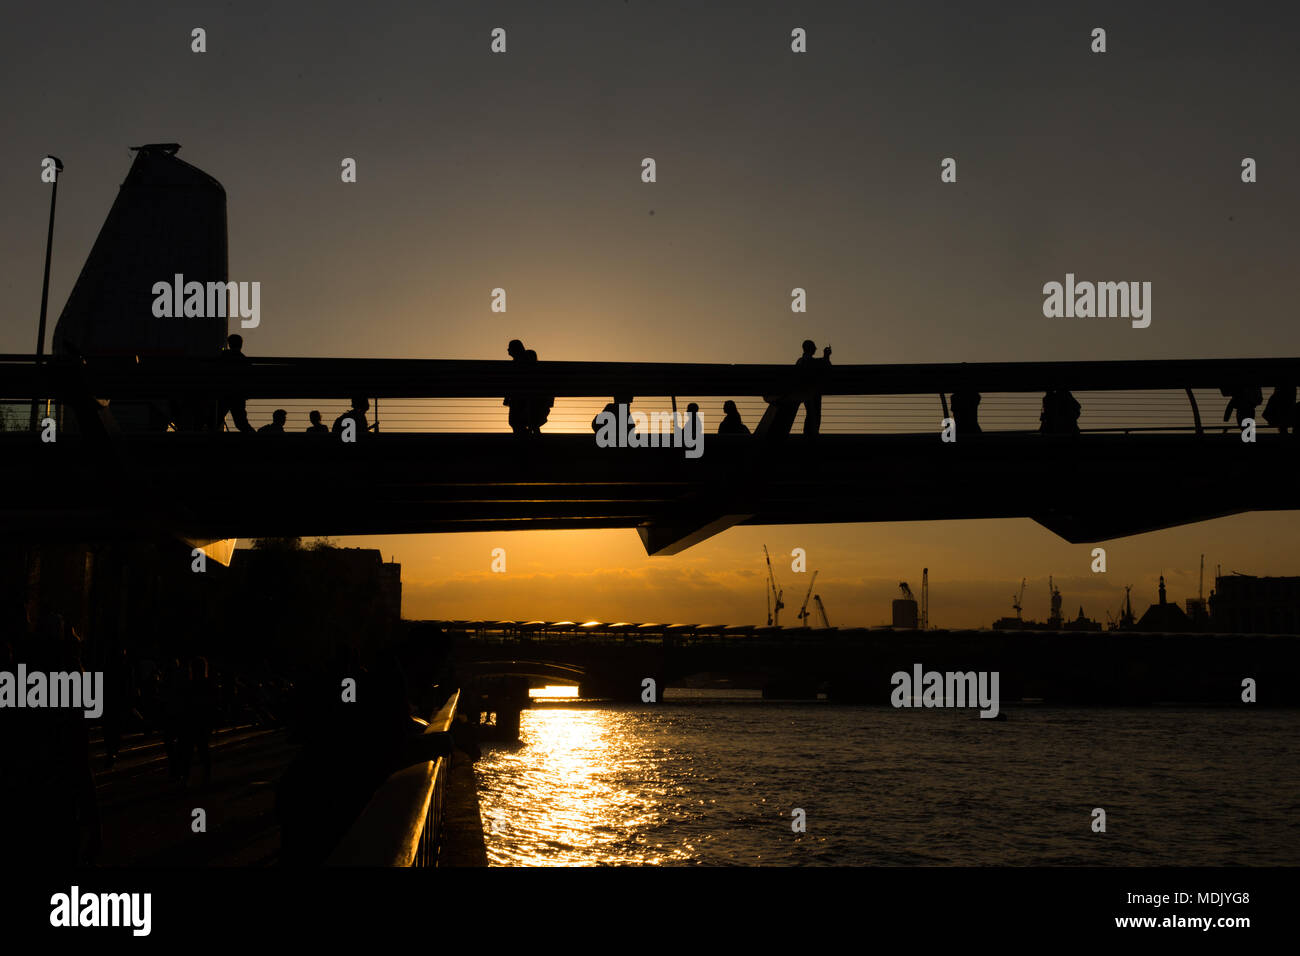 London, UK. 19th April, 2018. UK Weather: Beautiful sunset over the River Thames, with Millennium Bridge in silhouette in London, UK Credit: Carol MoirAlamy Live News Stock Photo Stock Photo